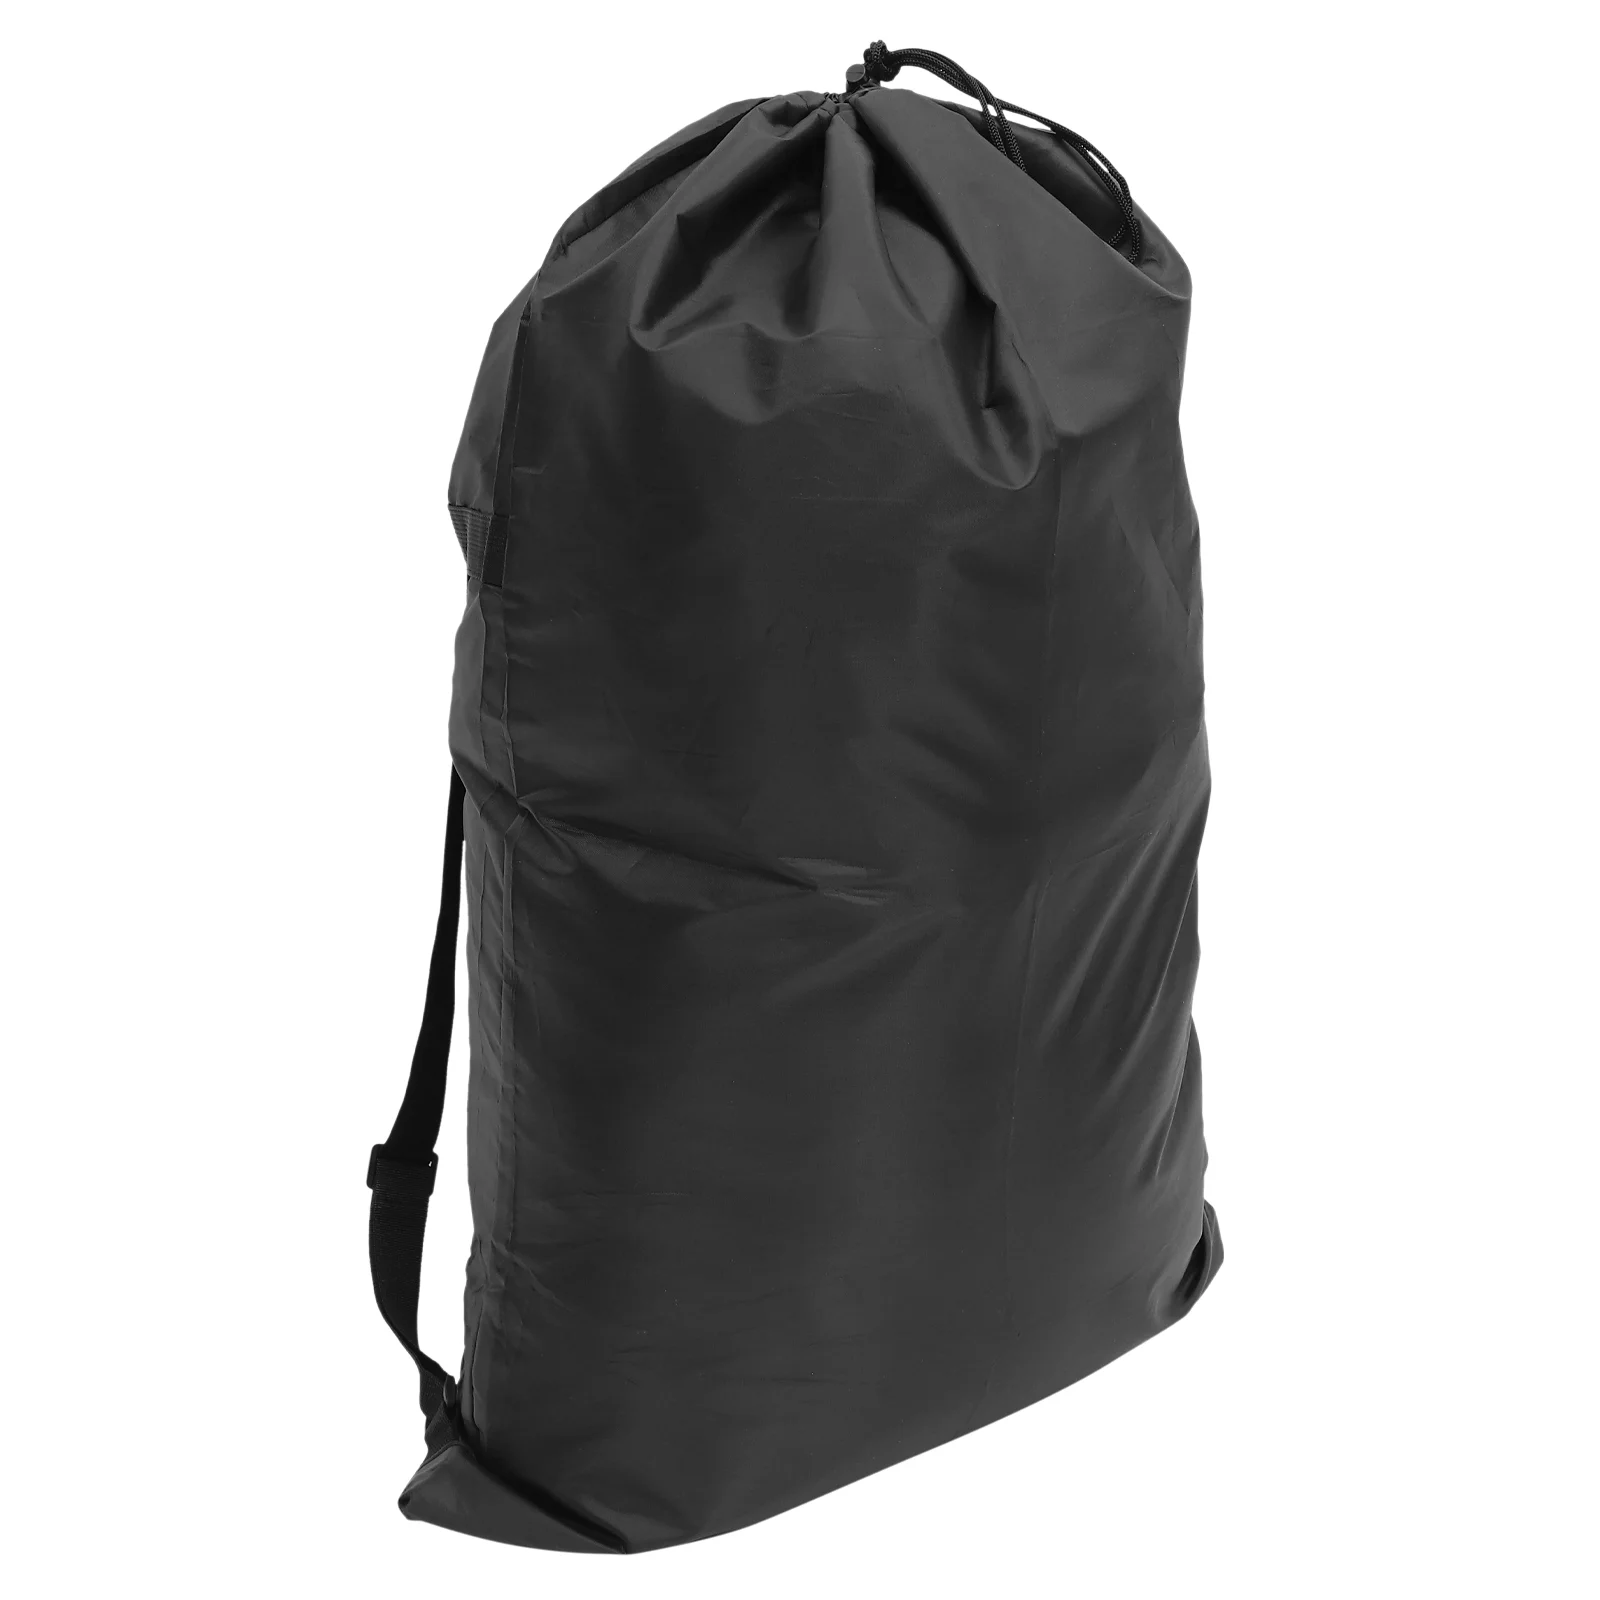 Heavy Duty Backpack Laundry Bag Camping Travel Large Clothing Storage (black) for Sports Dorm Polyester Organizer Bags